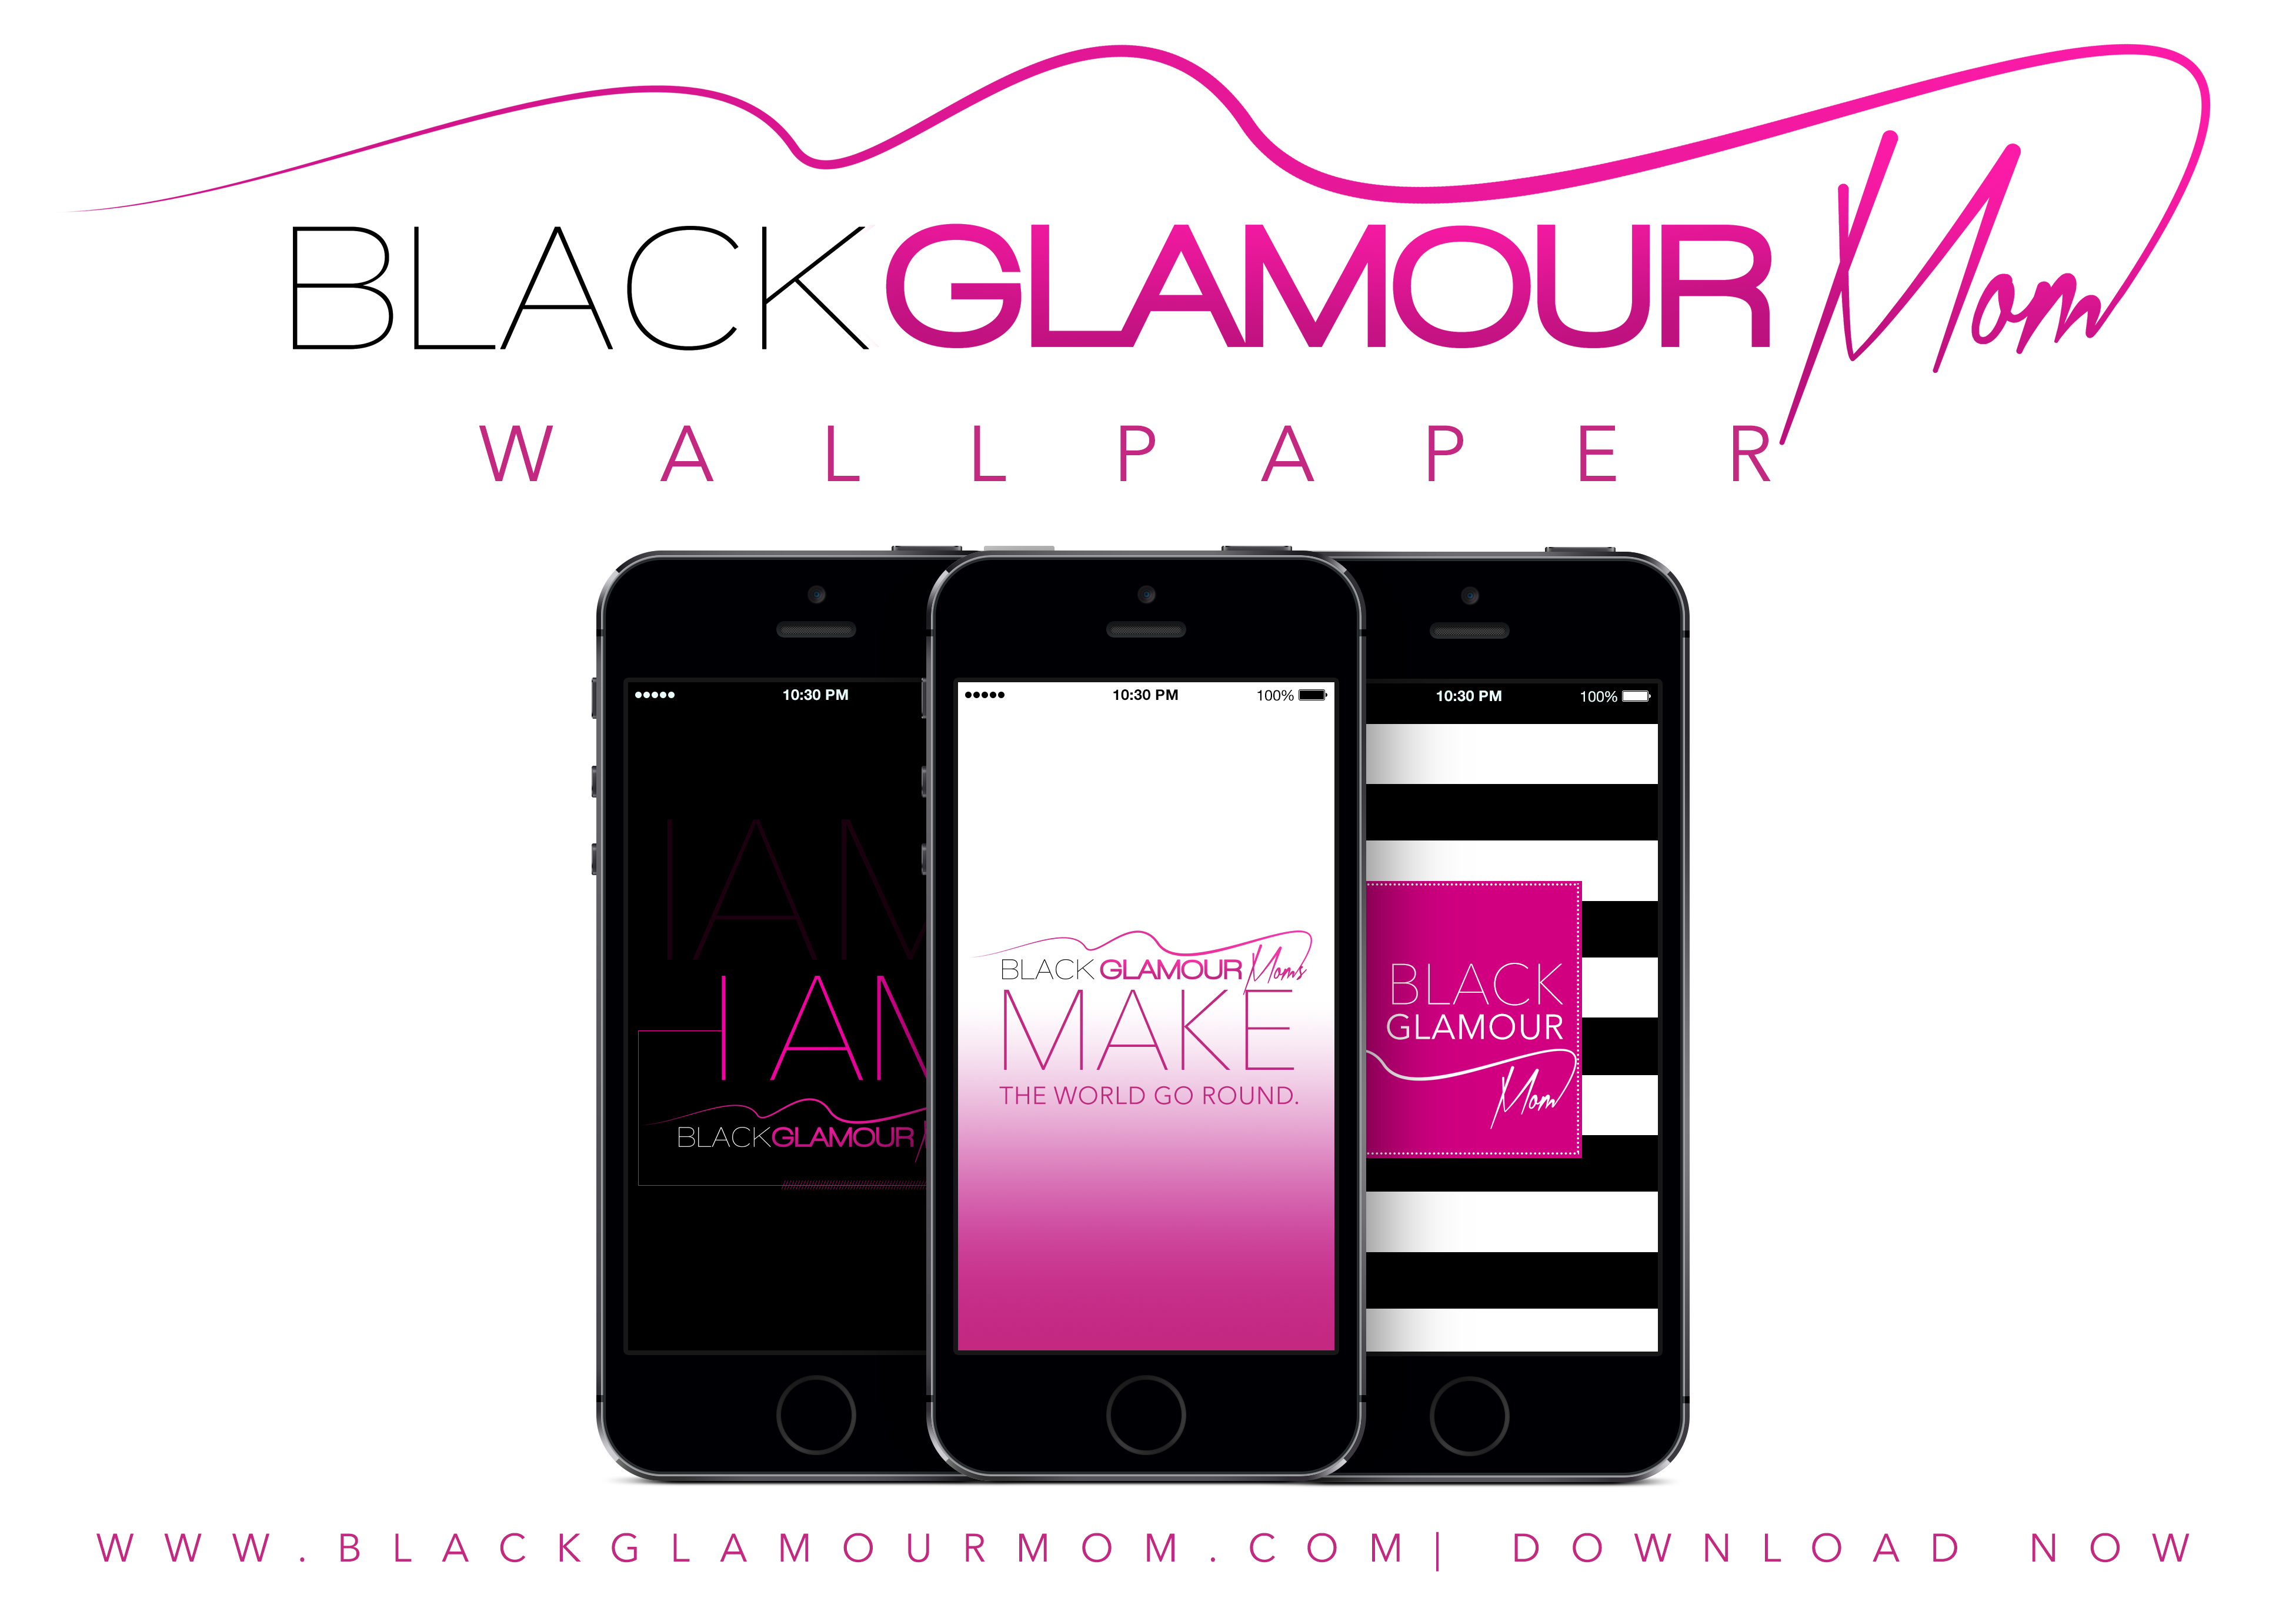 BGM Announcement: BlackGlamourMom iPhone WallPapers Are Here!